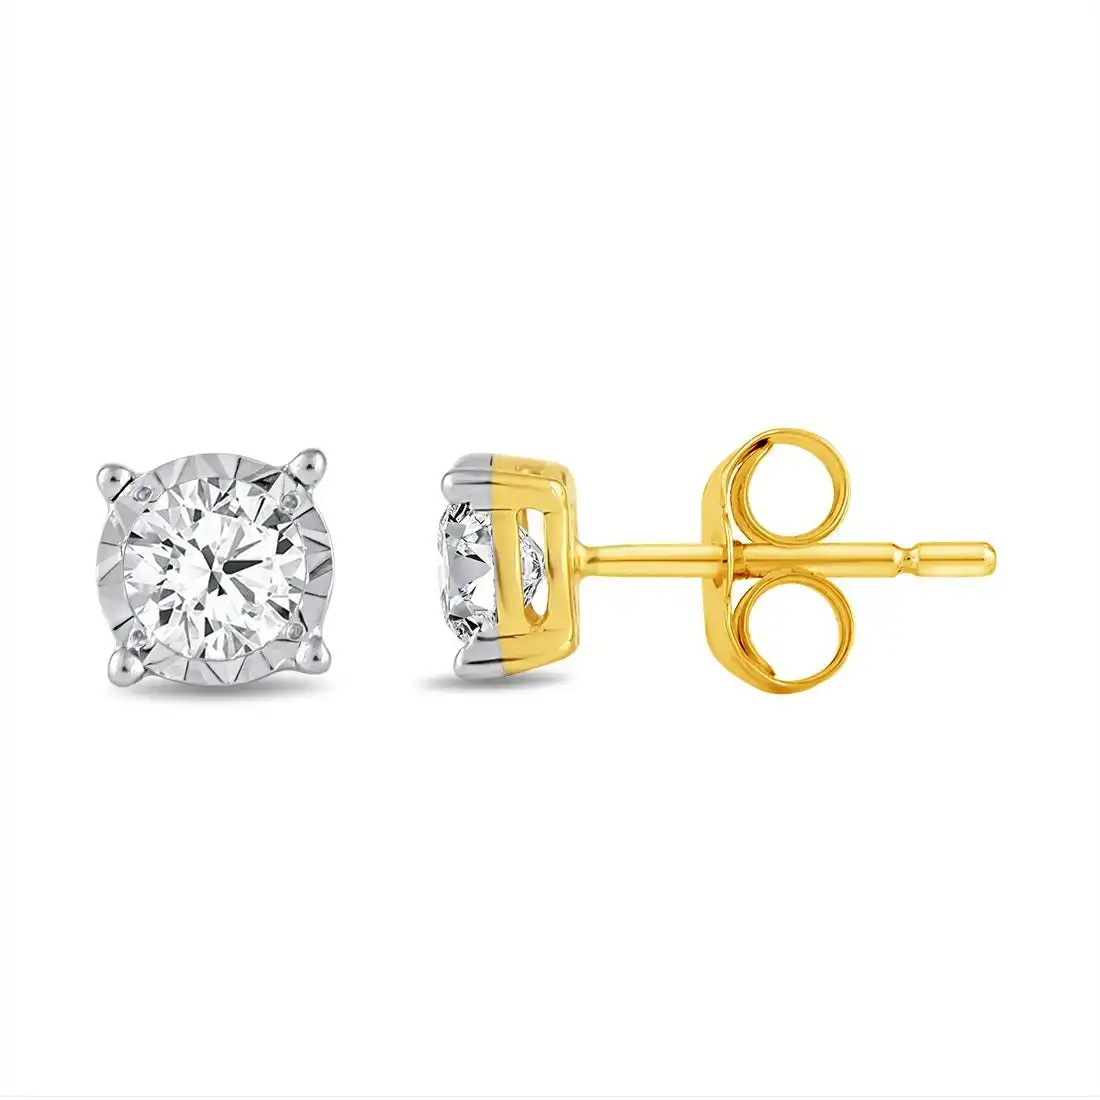 Tia Miracle Halo Earrings with 1/2ct of Diamonds in 9ct Yellow Gold